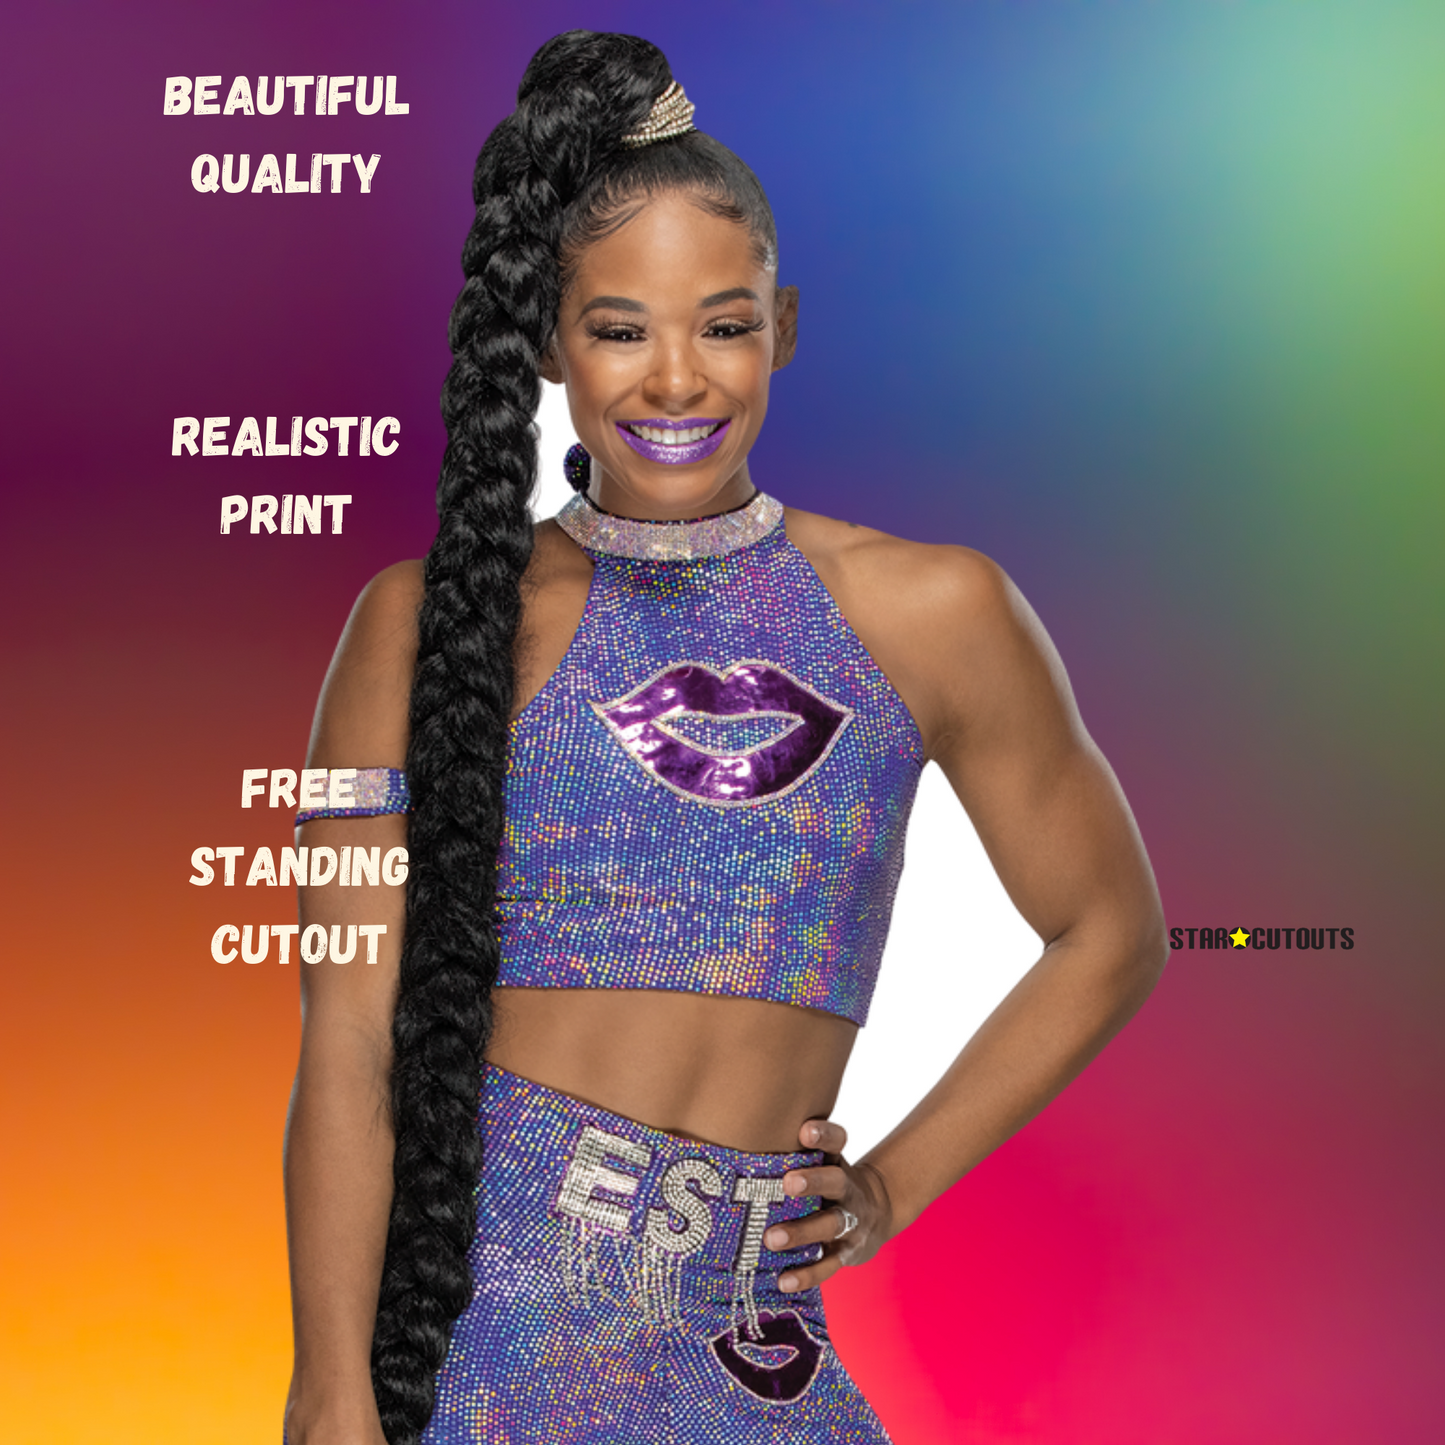 SC4266 Bianca Belair Purple Outfit WWE Lifesize Cardboard Cut Out With Mini Wrestler